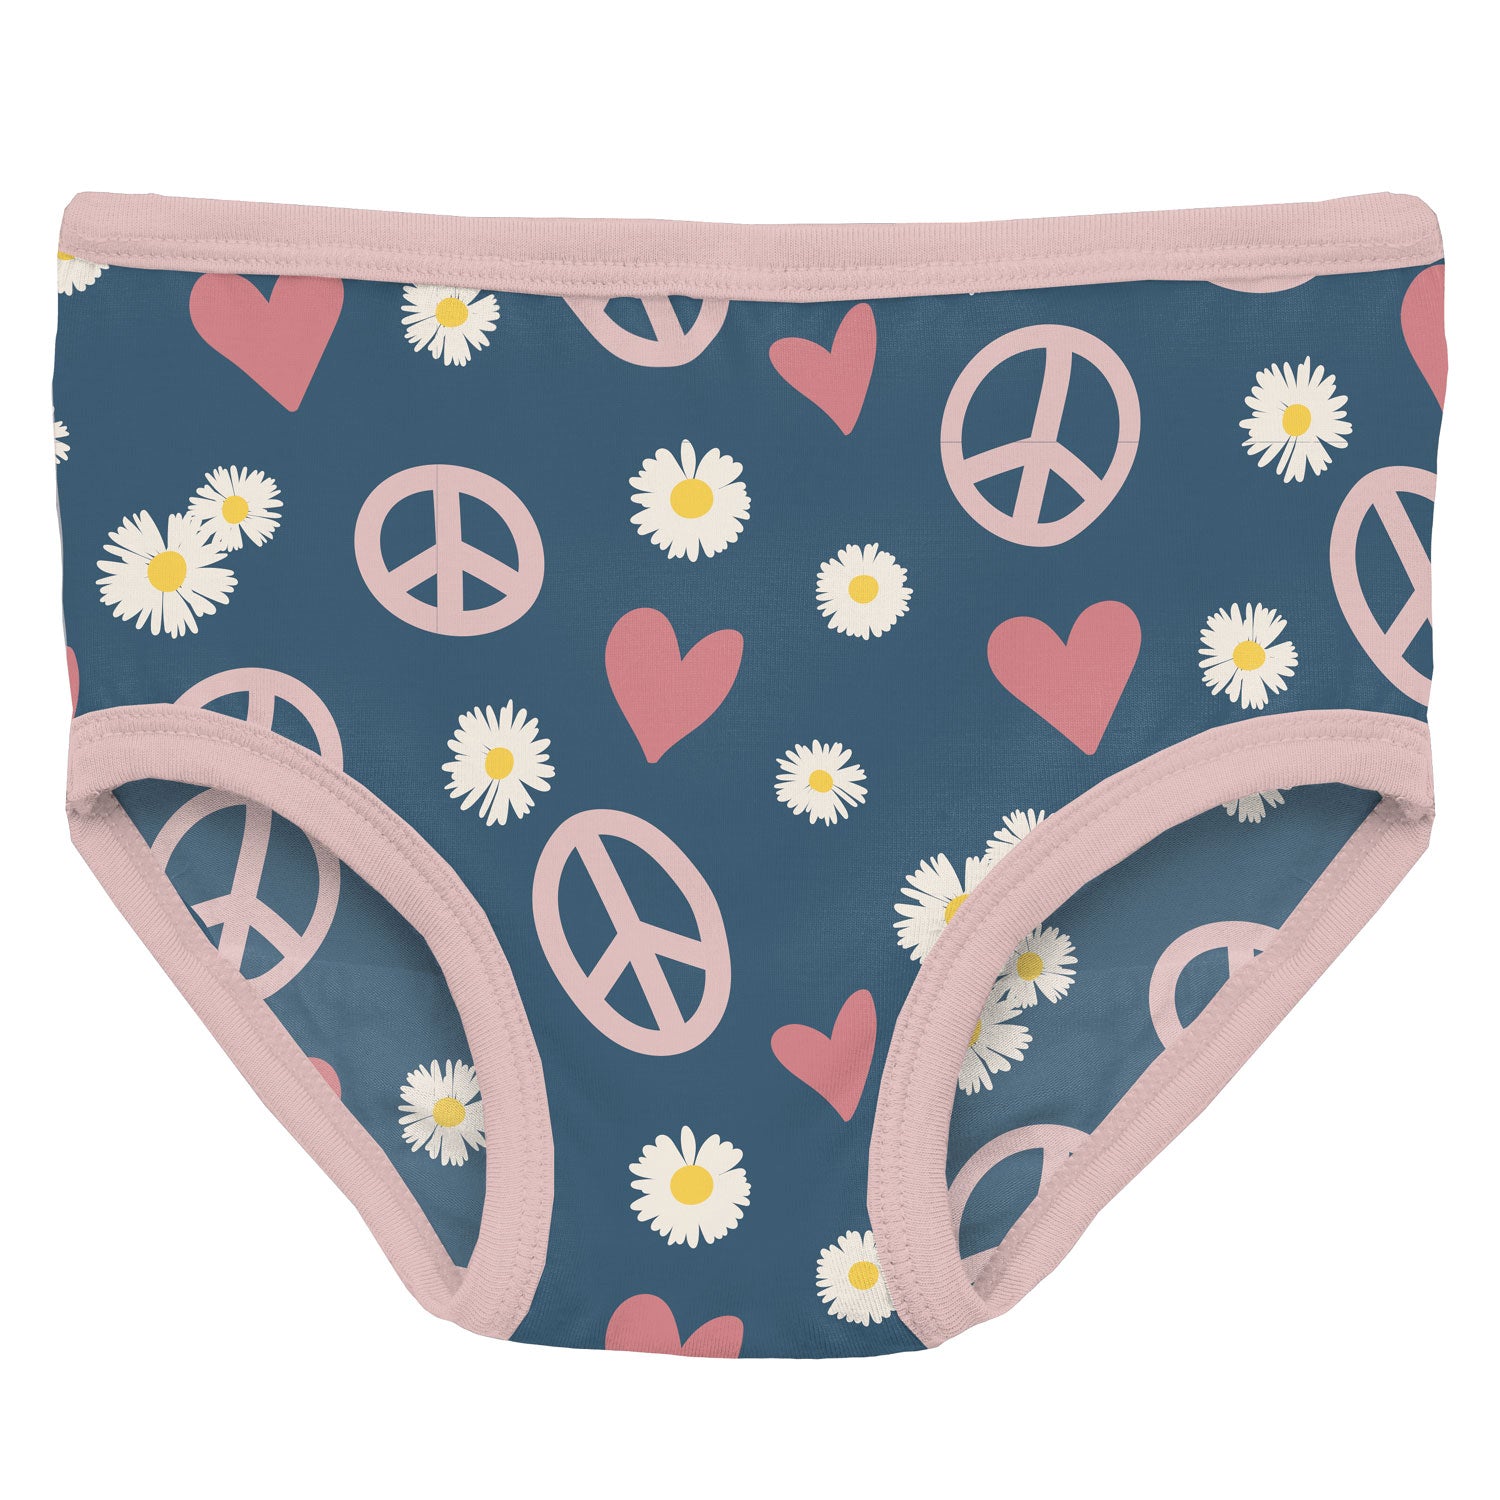 Kickee Pants Bamboo Girls Underwear Set - Peace, Love and Happiness